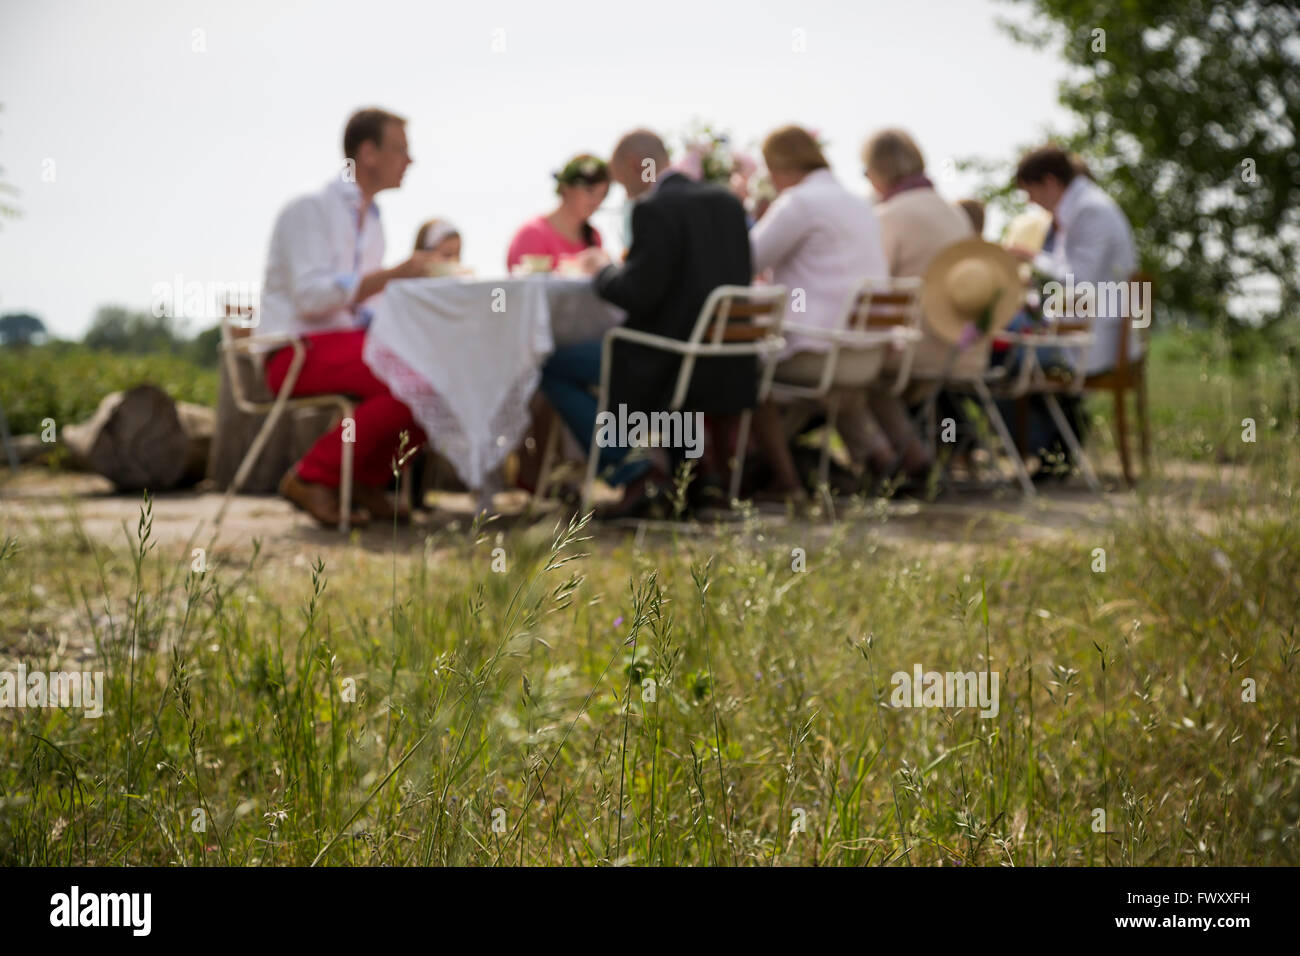 Sweden, Skane, Family with one child (8-9) during midsummer celebrations Stock Photo